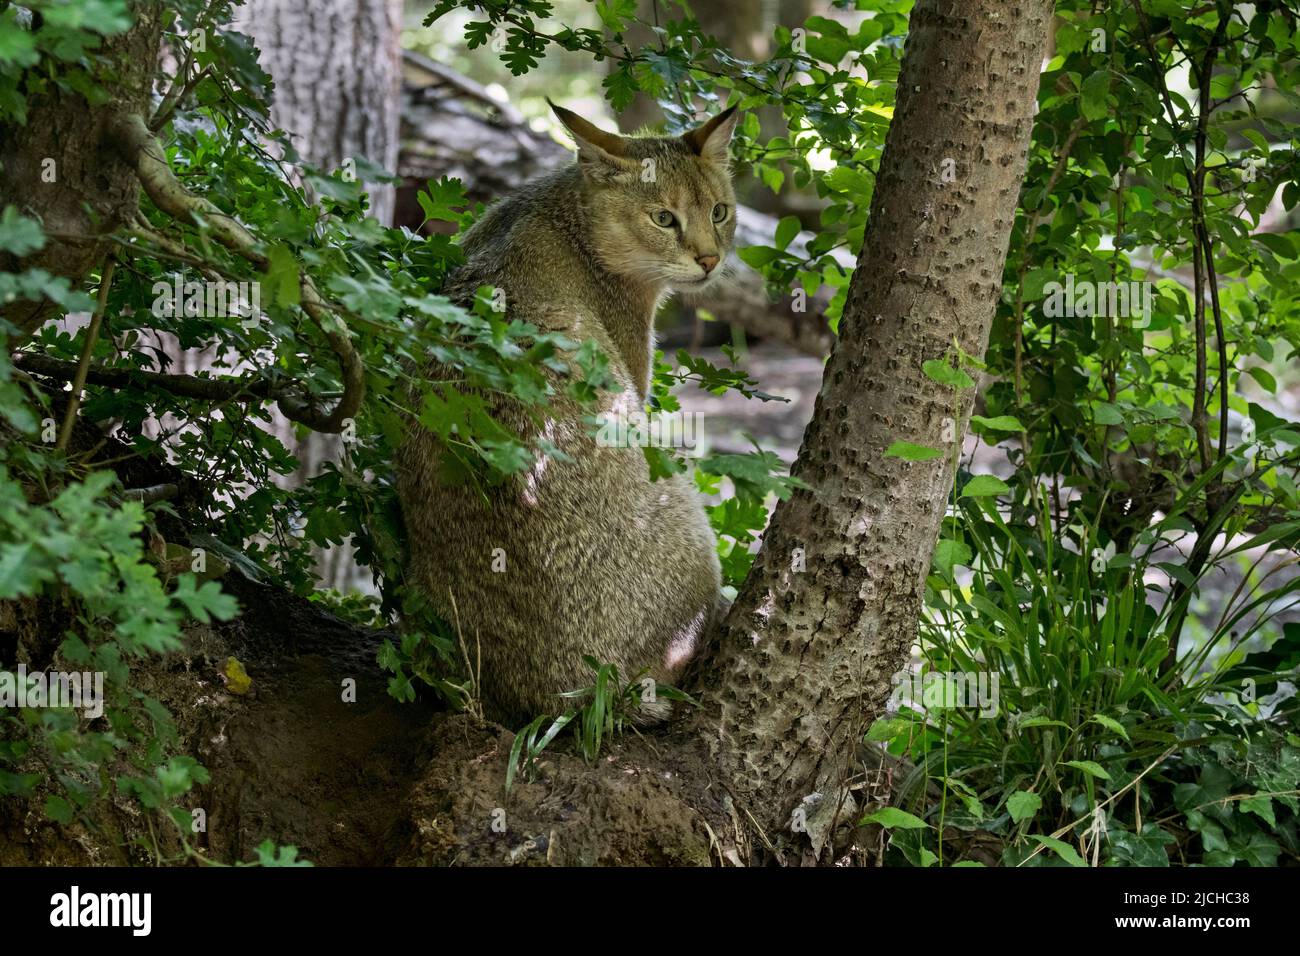 Jungle cat / reed cat / swamp cat (Felis chaus / Felis catolynx) in marshland, native to the Middle East, the Caucasus, South Asia and southern China Stock Photo